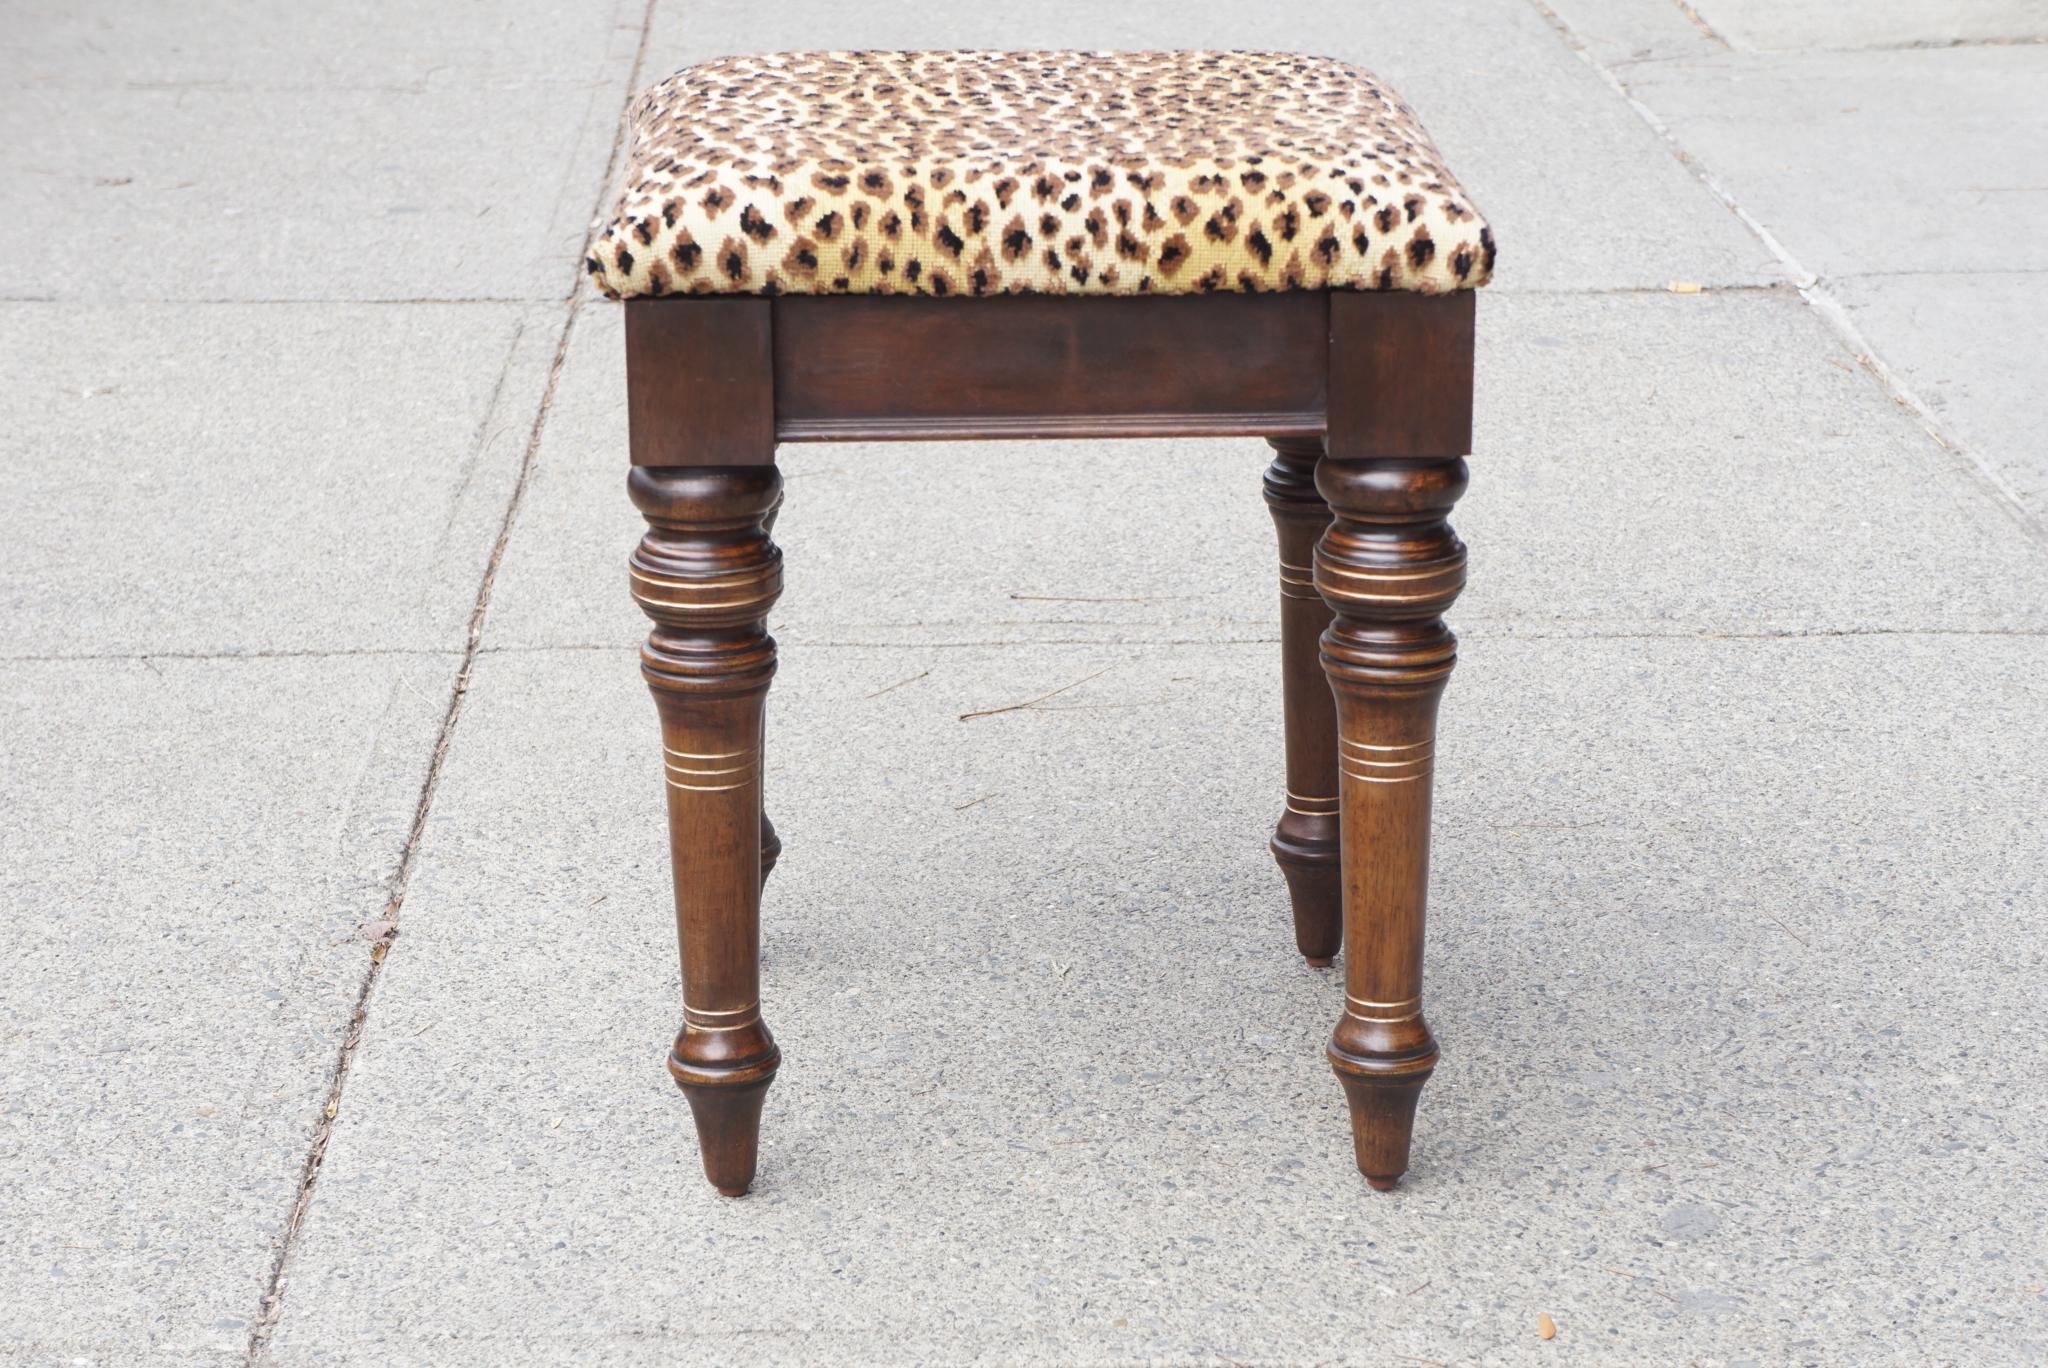 This walnut carved and turned footstool was made circa 1875 in the Aesthetic Movement style. Most likely made in America the stool is of a chunky robust proportion with large turned legs and deeply incised lines that have been gilded giving the